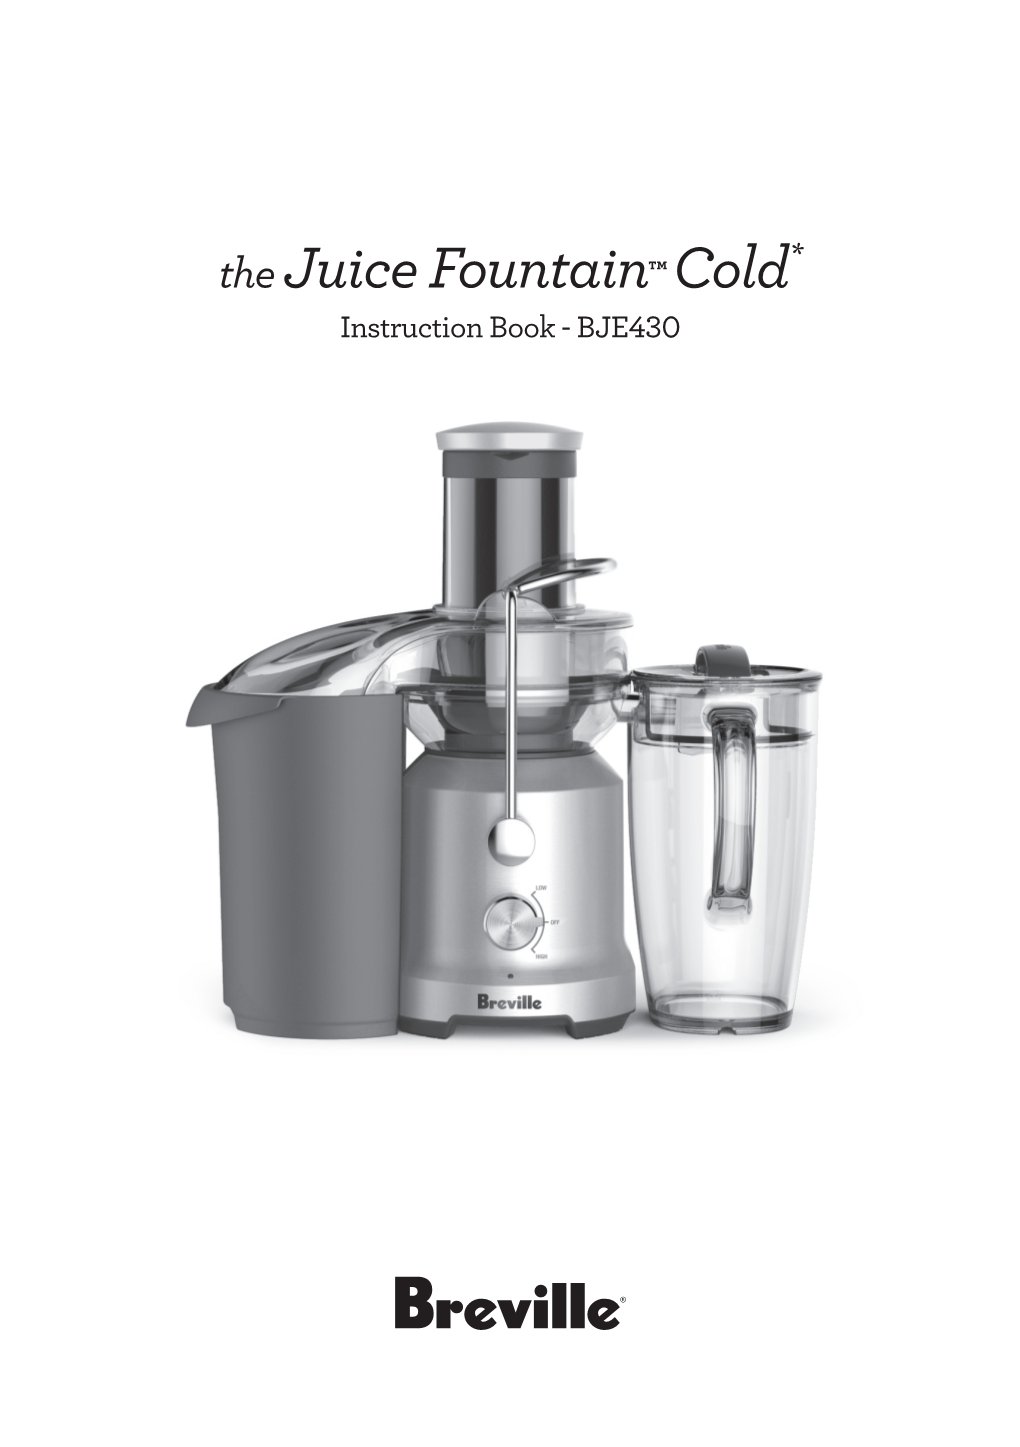 The Juice Fountain™ Cold*